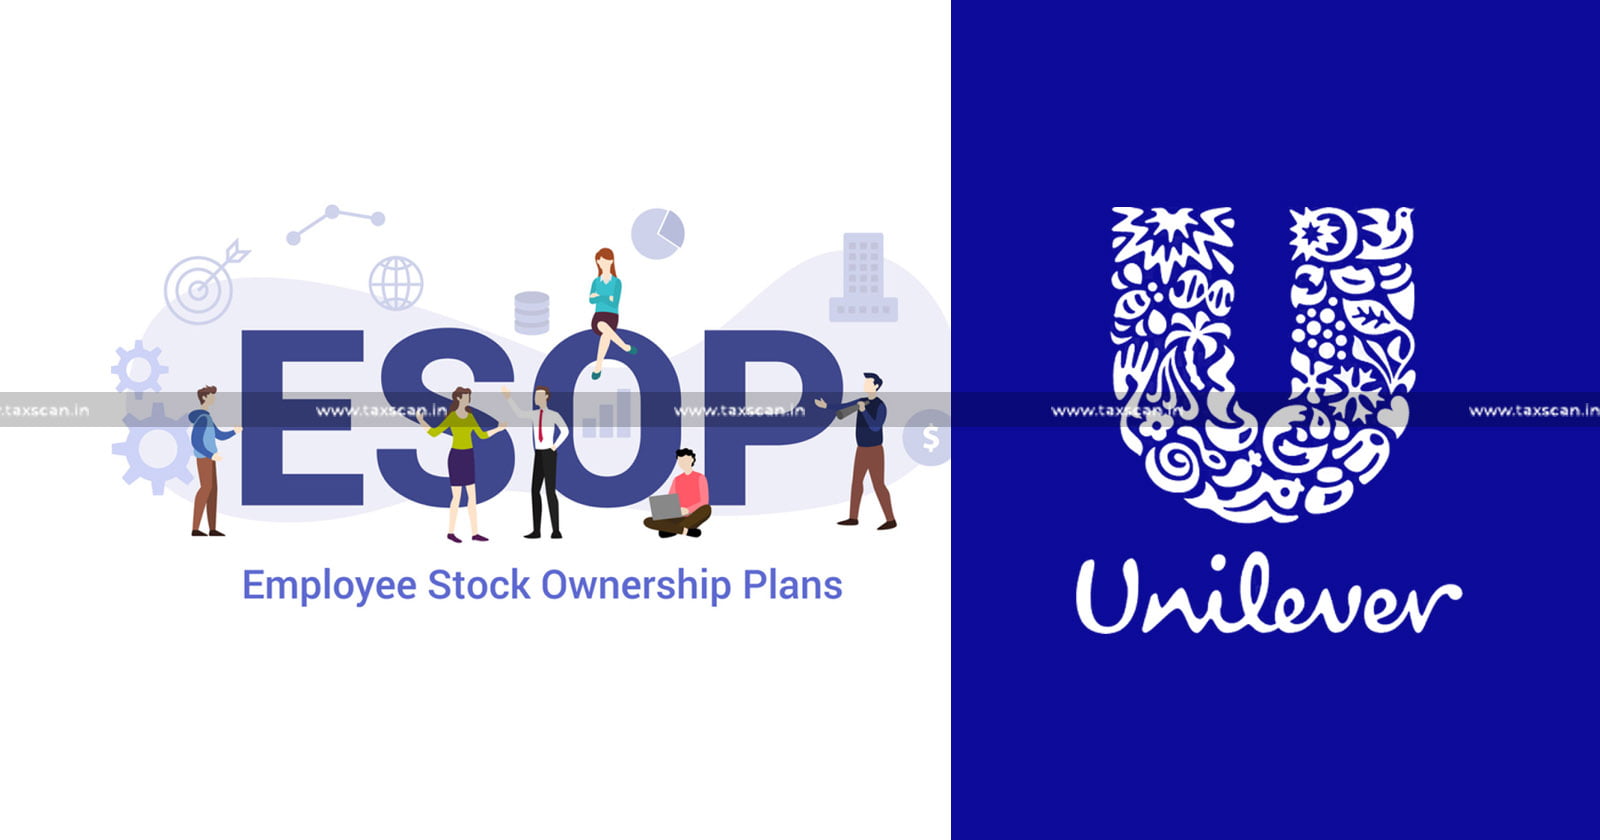 ESOP is Capital in Nature - ITAT Directs to Delete Income Tax Addition - Against Unilever India Export - TAXSCAN